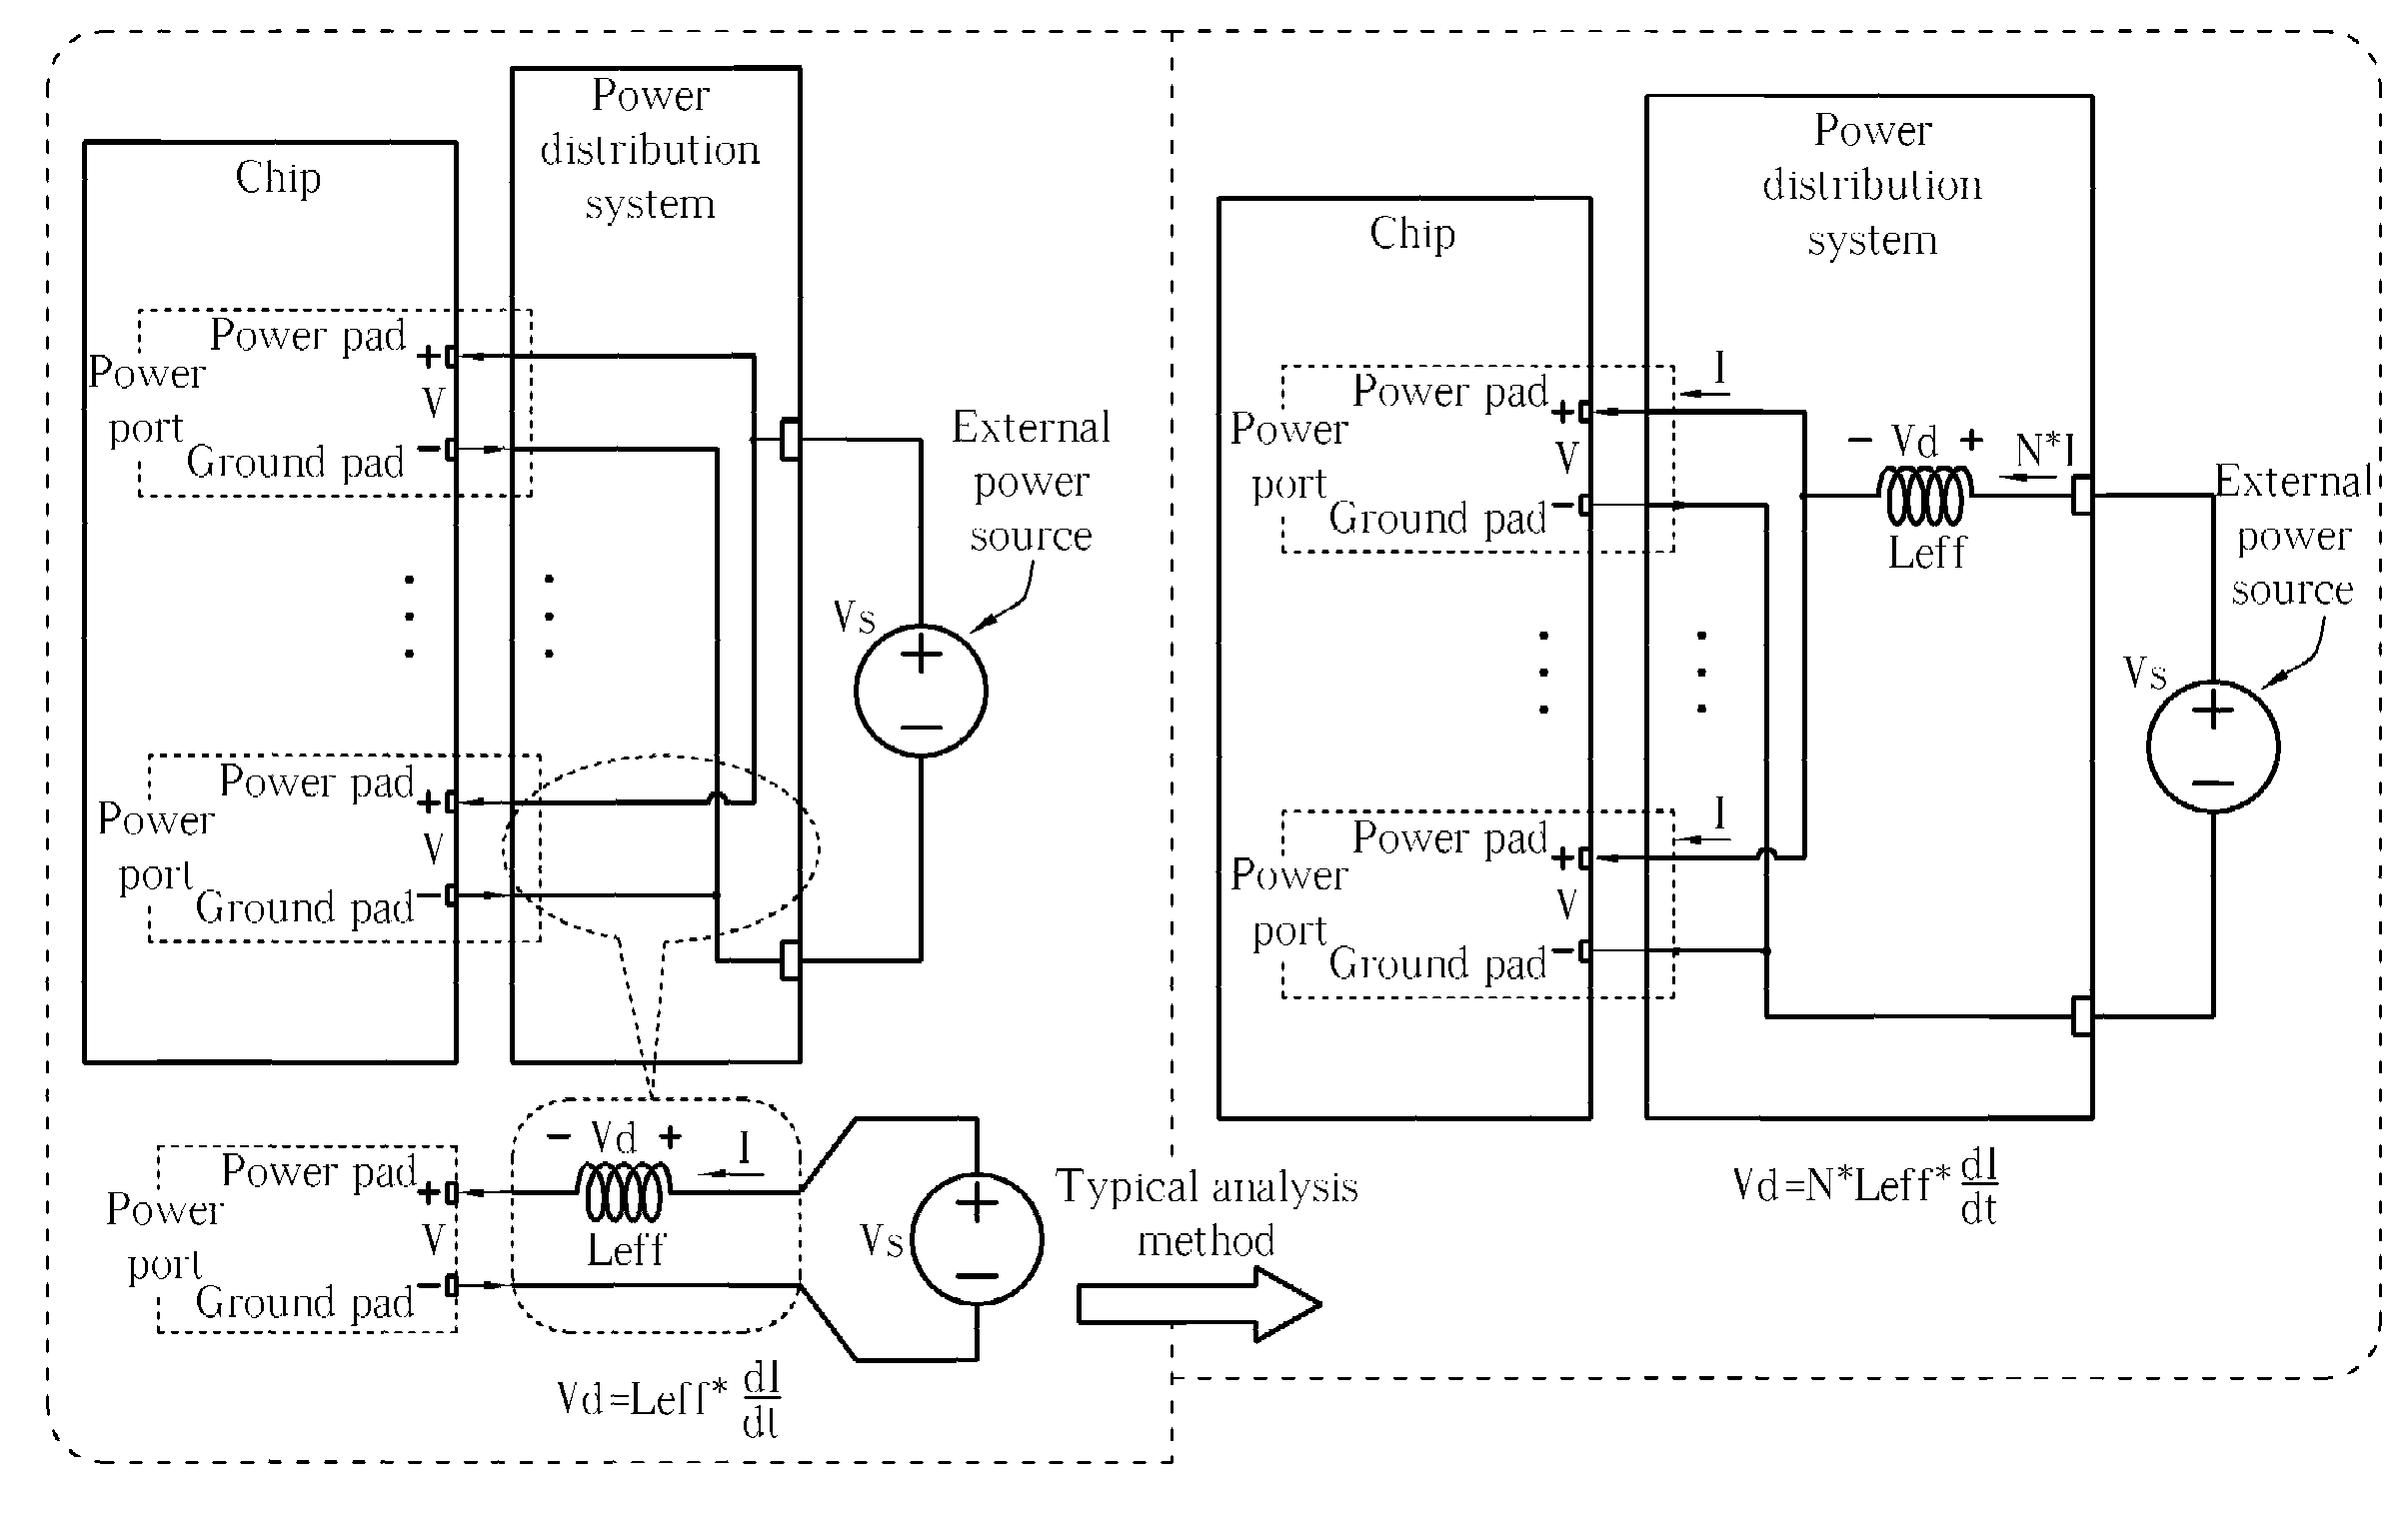 Method for analyzing power distribution system and related techniques